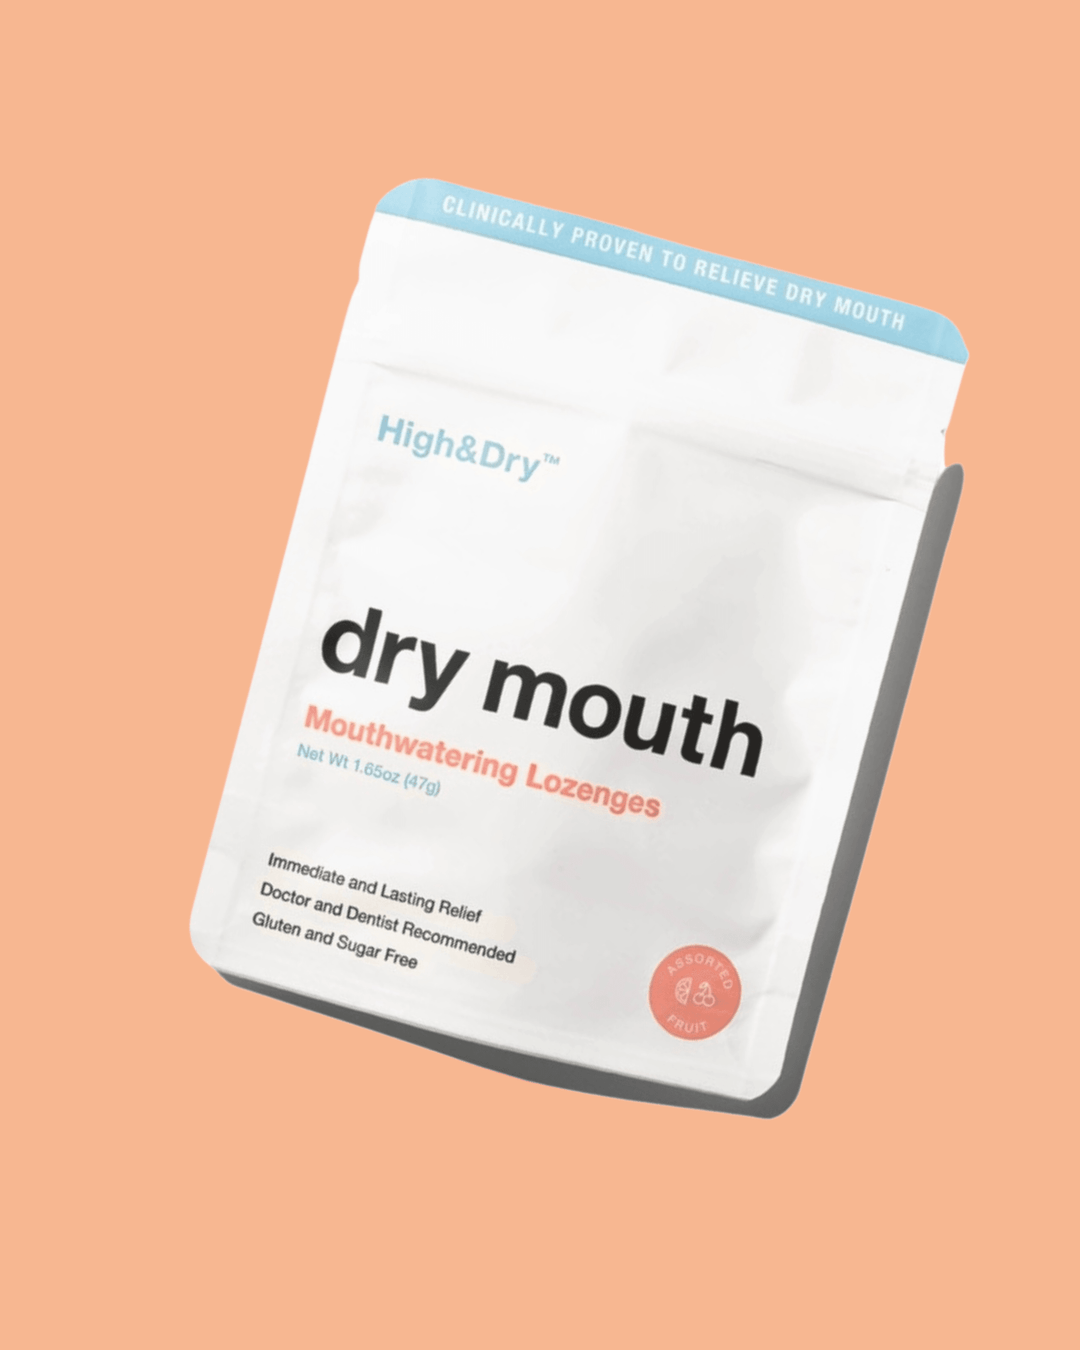 1.65 oz high and dry mouthwatering lozenges